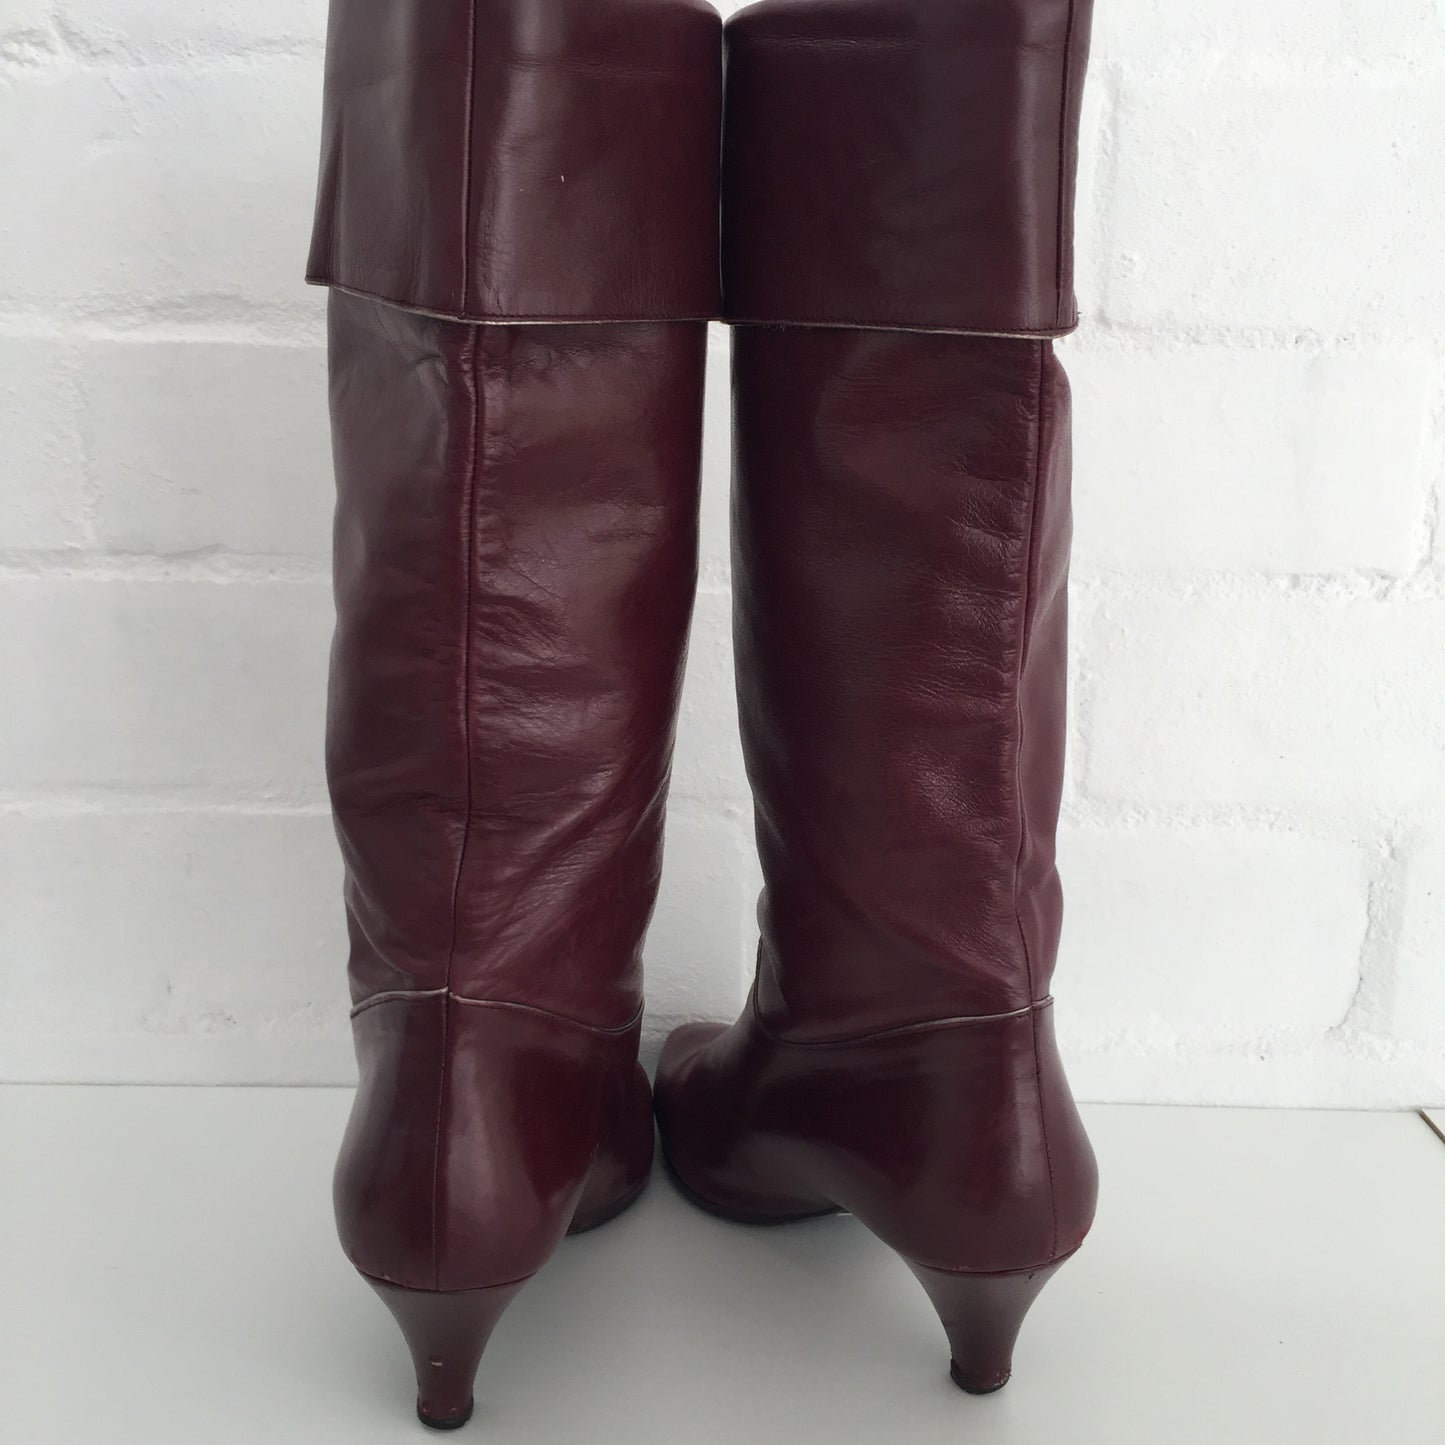 VINTAGE Boots Genuine LEATHER Beautiful Size 37